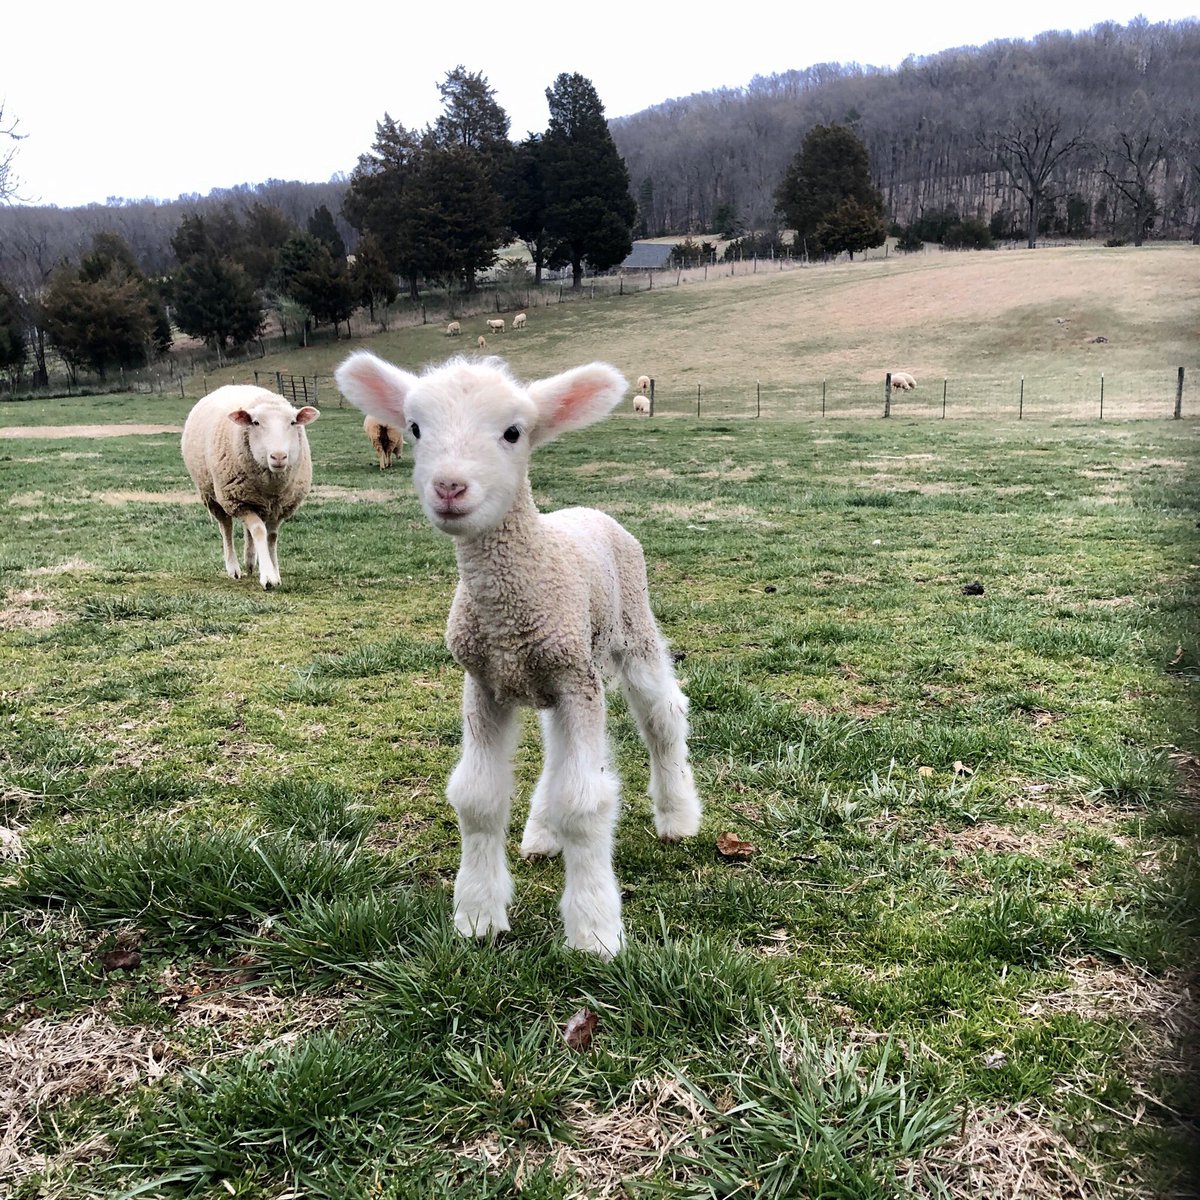 New lambs content incoming! This little sheepie says everything will be okay :)